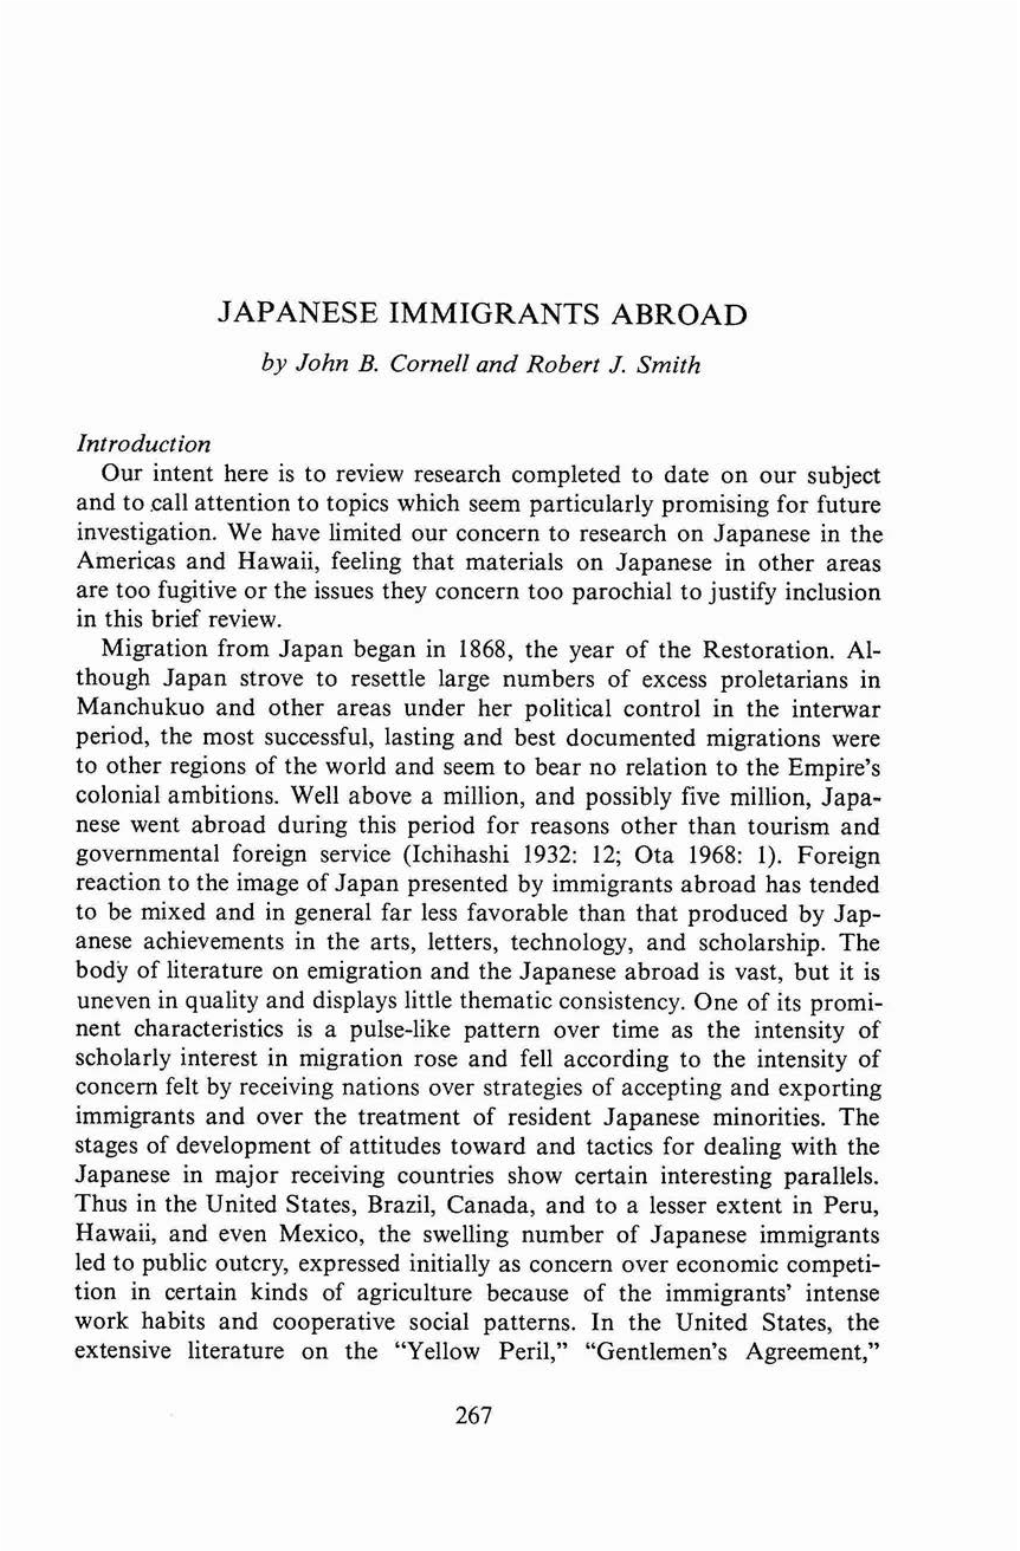 JAPANESE IMMIGRANTS ABROAD by John B